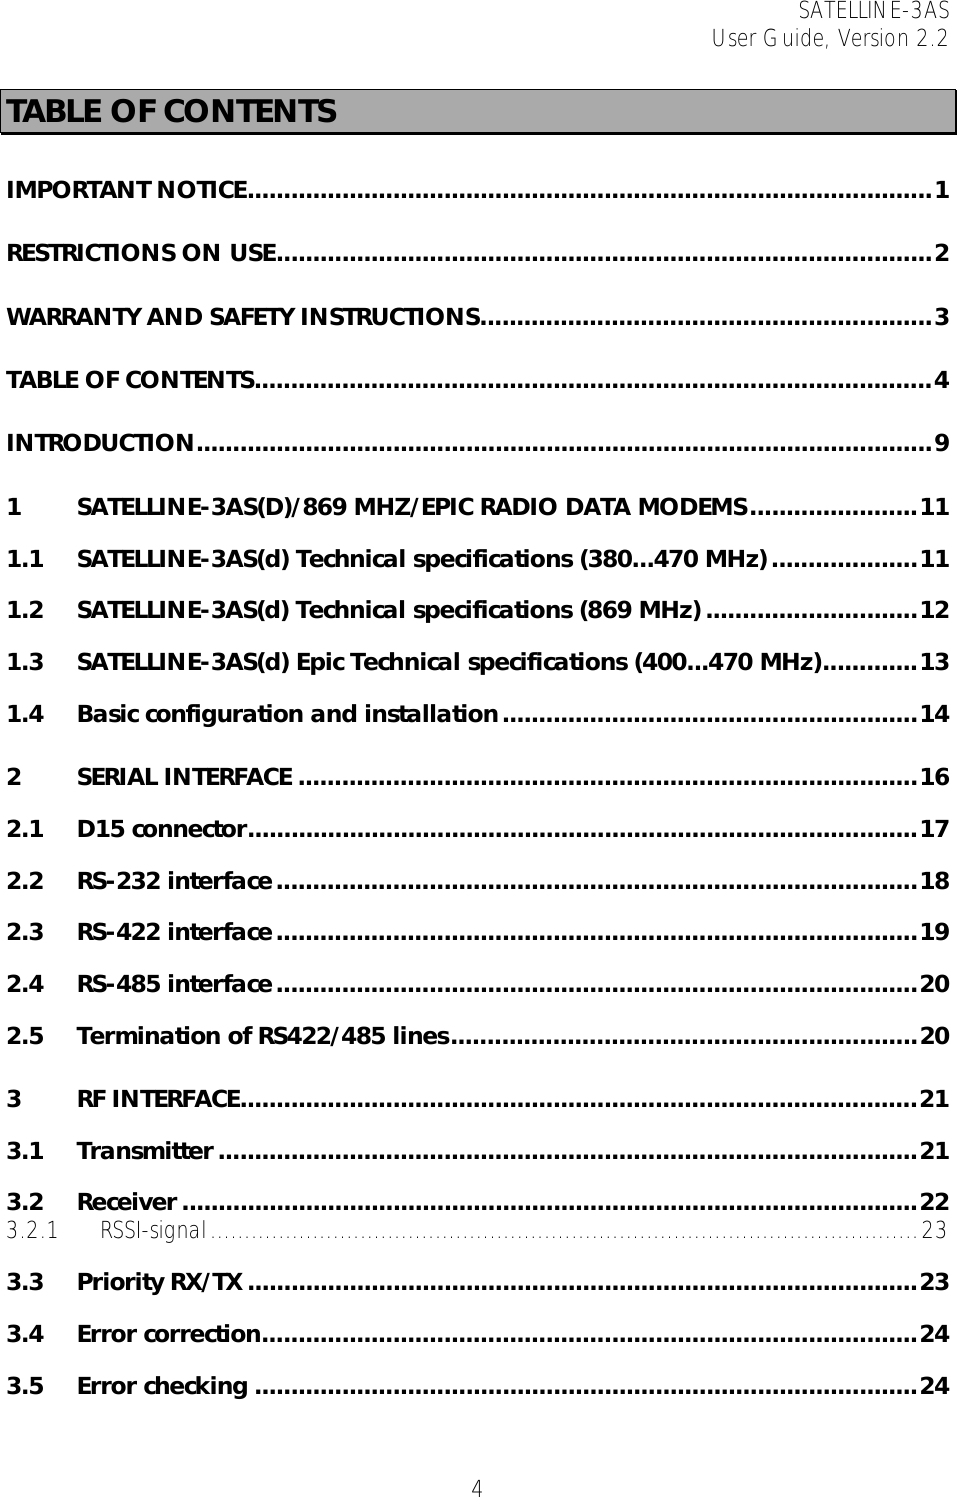 SATELLINE-3AS User Guide, Version 2.2   4TABLE OF CONTENTS IMPORTANT NOTICE..............................................................................................1 RESTRICTIONS ON USE..........................................................................................2 WARRANTY AND SAFETY INSTRUCTIONS..............................................................3 TABLE OF CONTENTS.............................................................................................4 INTRODUCTION.....................................................................................................9 1 SATELLINE-3AS(D)/869 MHZ/EPIC RADIO DATA MODEMS.......................11 1.1 SATELLINE-3AS(d) Technical specifications (380...470 MHz)....................11 1.2 SATELLINE-3AS(d) Technical specifications (869 MHz) .............................12 1.3 SATELLINE-3AS(d) Epic Technical specifications (400...470 MHz).............13 1.4 Basic configuration and installation.........................................................14 2 SERIAL INTERFACE .....................................................................................16 2.1 D15 connector............................................................................................17 2.2 RS-232 interface........................................................................................18 2.3 RS-422 interface........................................................................................19 2.4 RS-485 interface........................................................................................20 2.5 Termination of RS422/485 lines................................................................20 3 RF INTERFACE.............................................................................................21 3.1 Transmitter................................................................................................21 3.2 Receiver .....................................................................................................22 3.2.1 RSSI-signal........................................................................................................23 3.3 Priority RX/TX ............................................................................................23 3.4 Error correction..........................................................................................24 3.5 Error checking ...........................................................................................24 